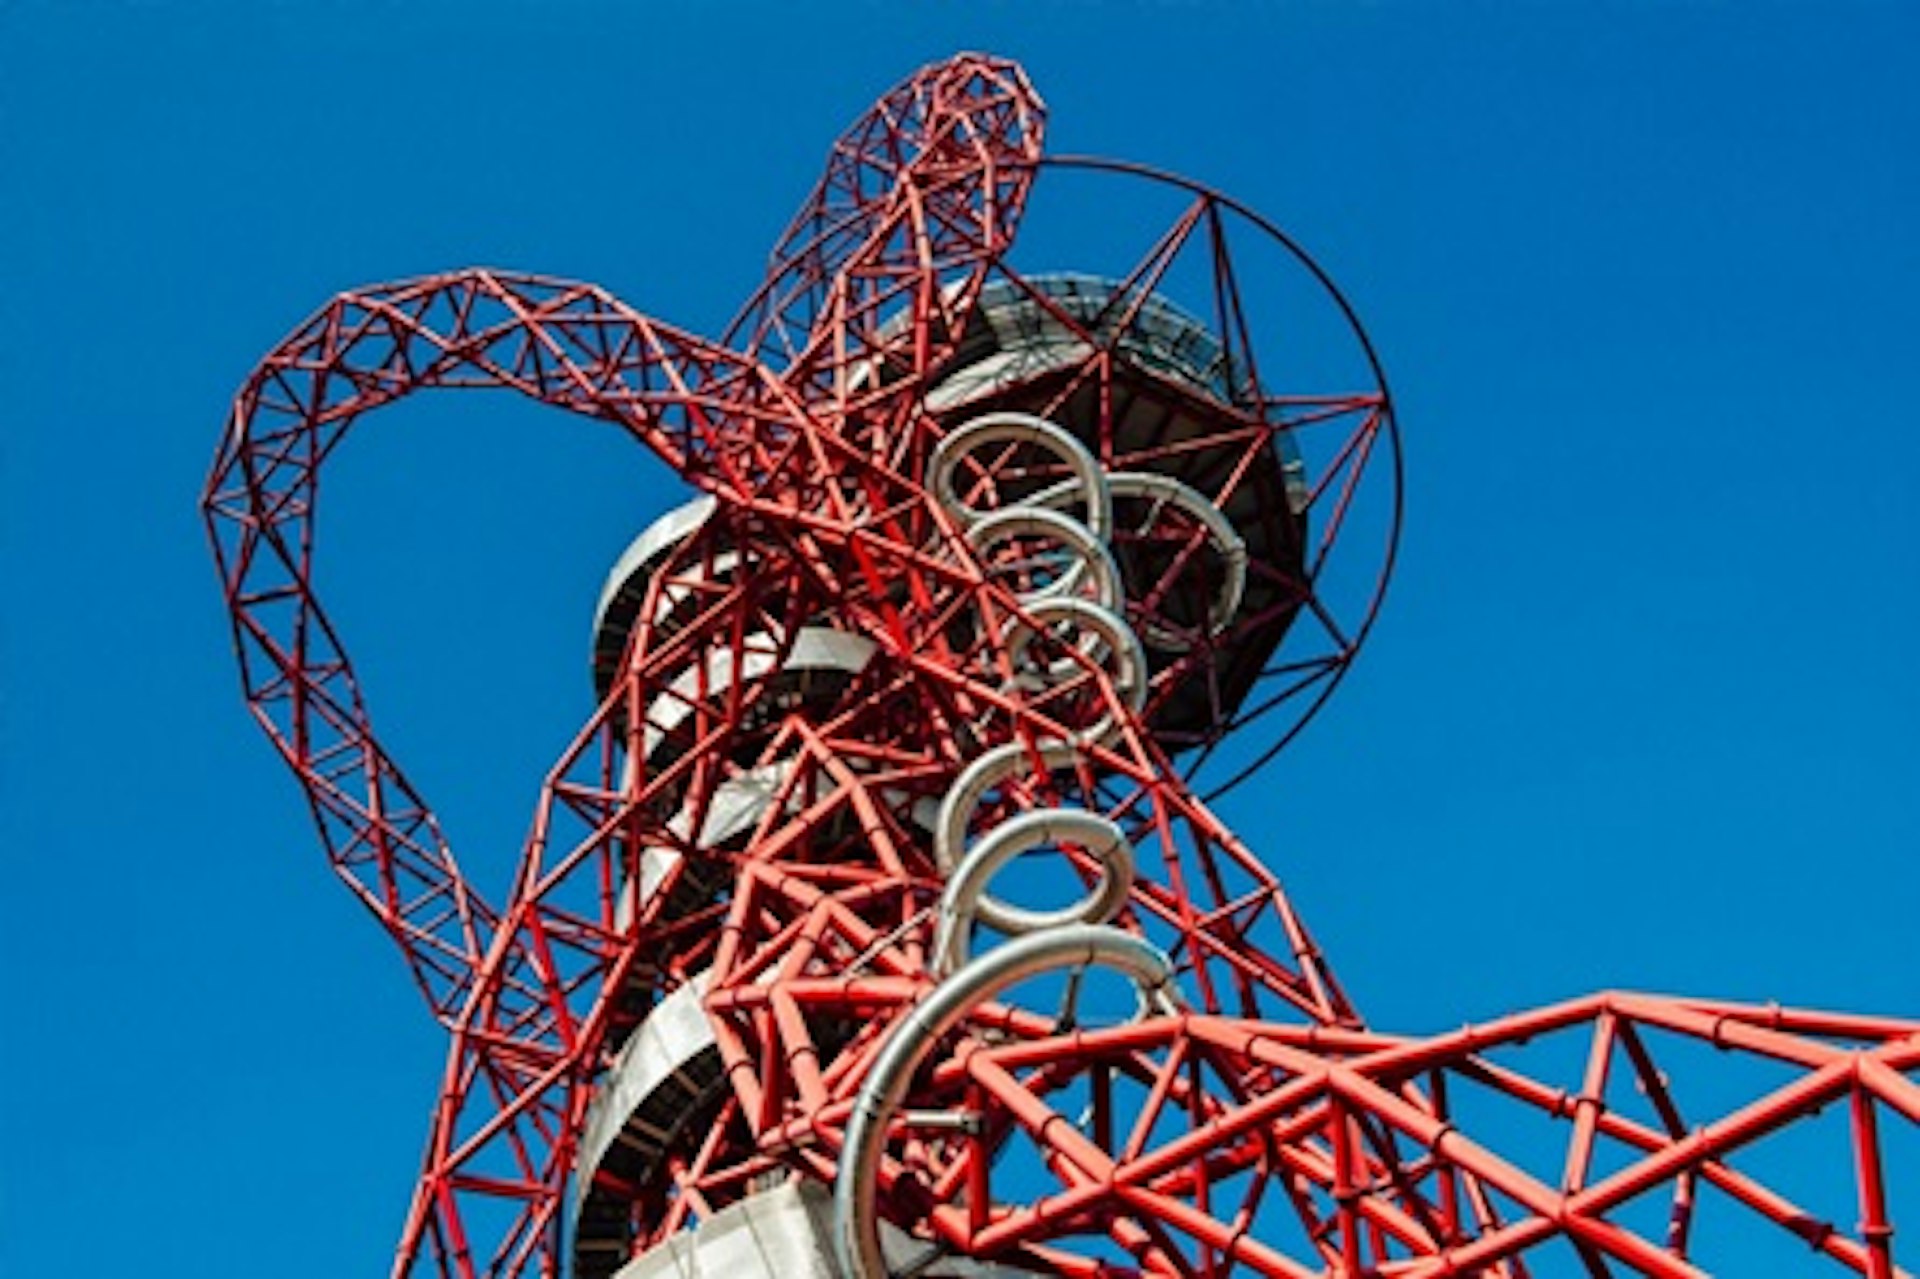 The ArcelorMittal Orbit Skyline Views for Two with a Bottle of Prosecco 1